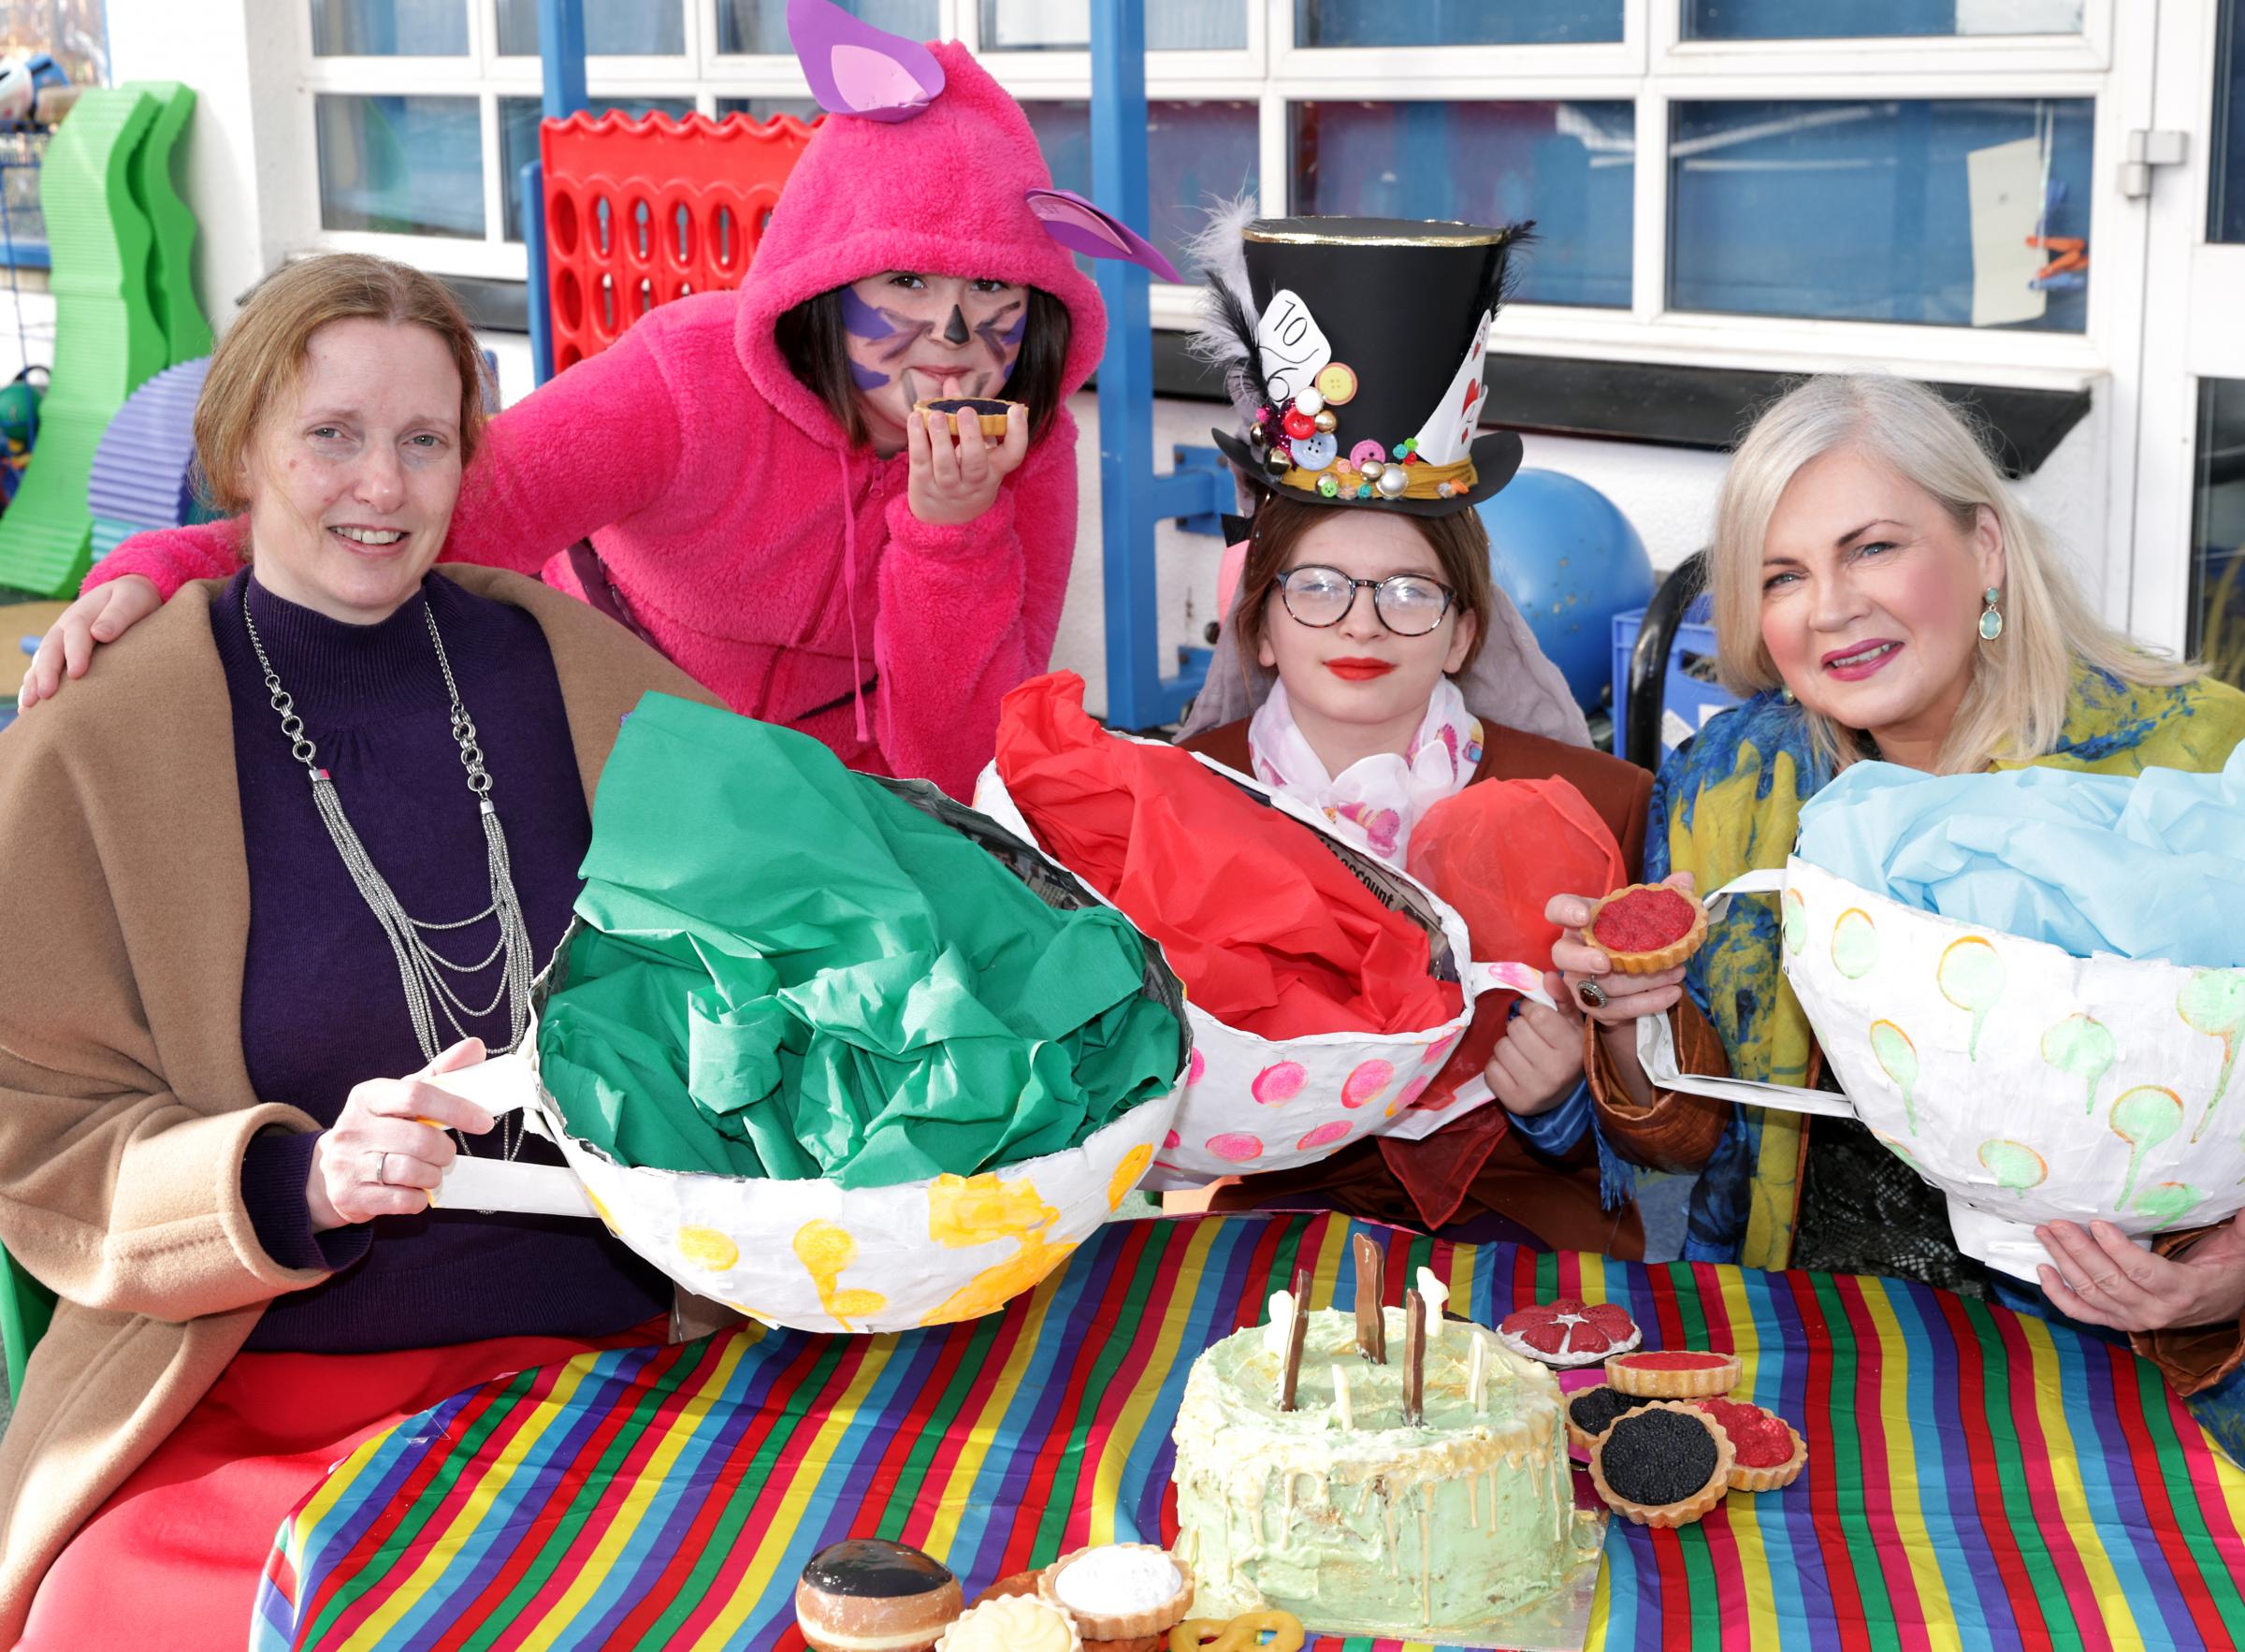 Mrs Sandra Isherwood, Principal, (left), with Keira Hatton, (Cheshire Cat), Kara-Lily Boyd, (Mad Hatter) and Noelle McAlinden, Artist.